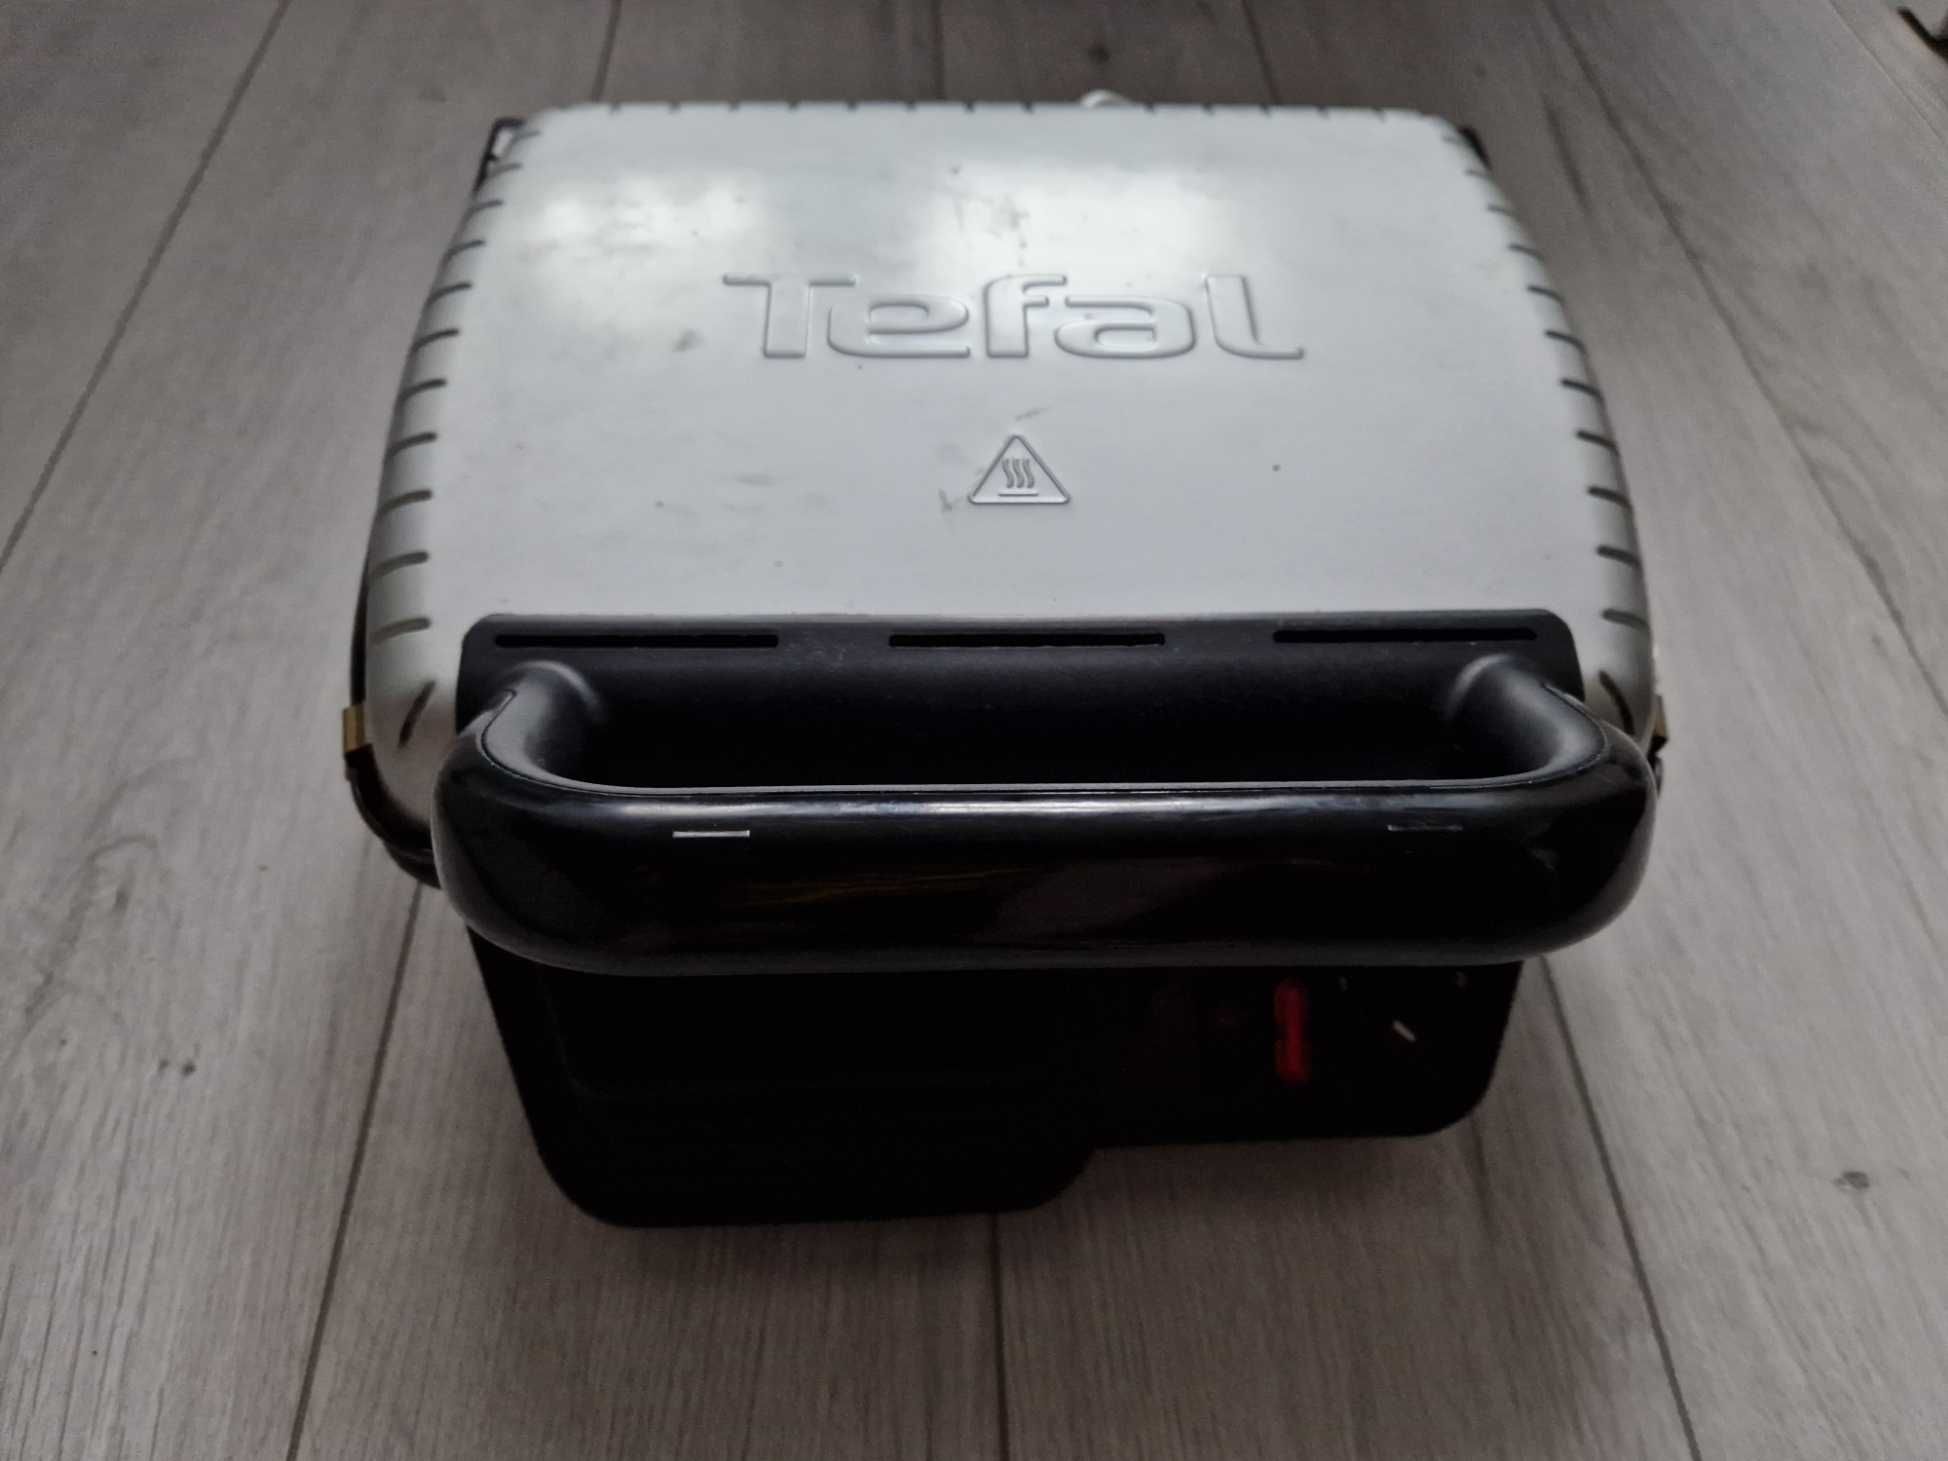 Grill Tefal 6695 s1